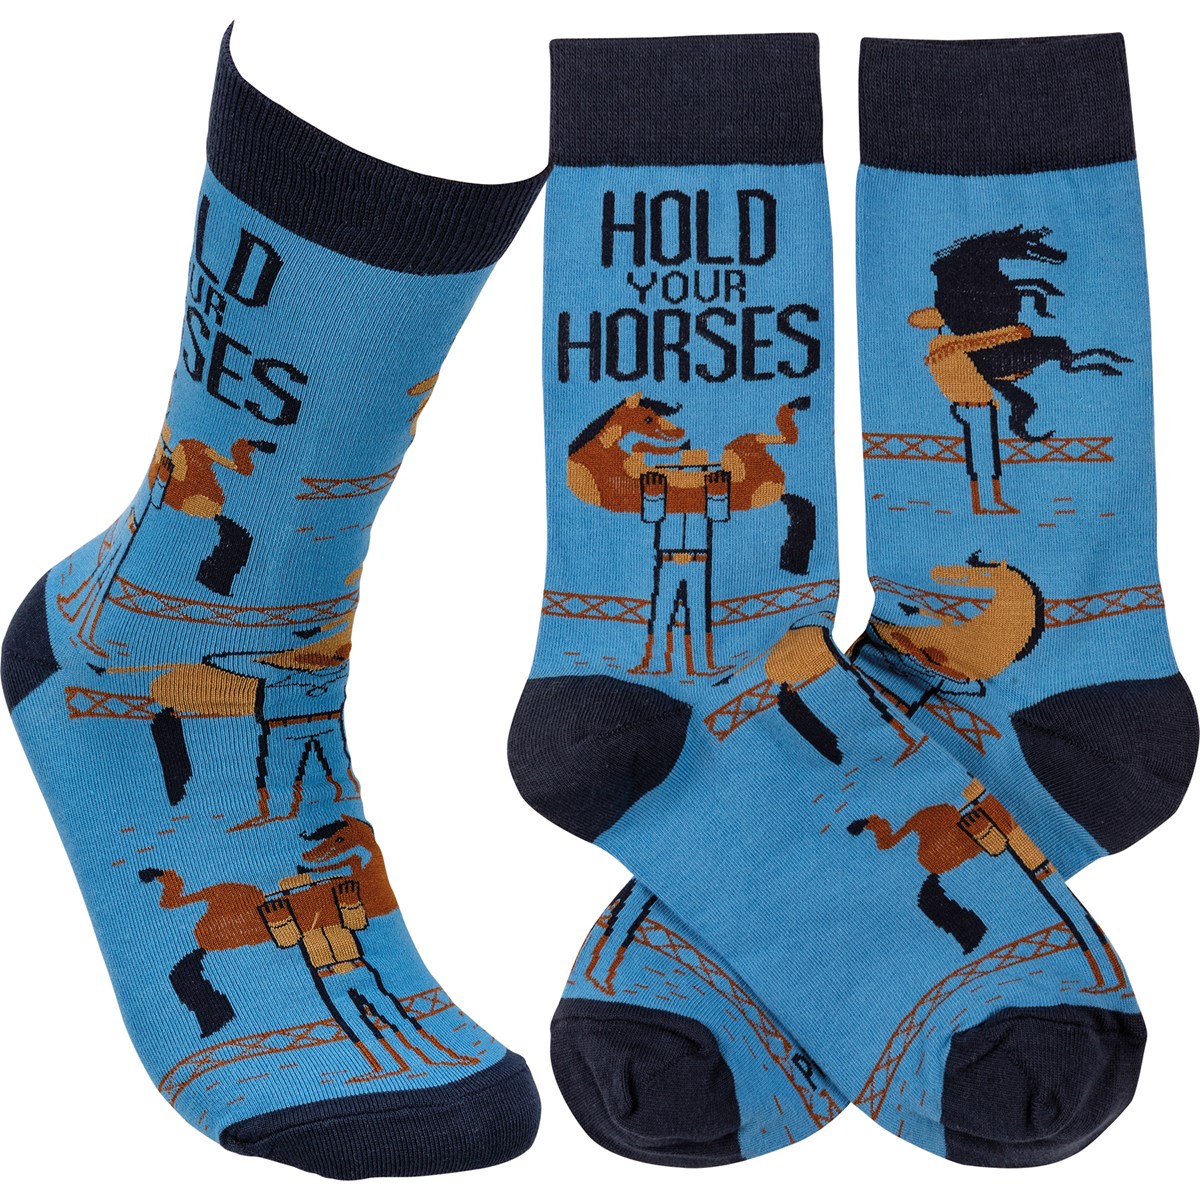 Socks - Hold Your Horses - One Size Fits Most - Cotton, Nylon, Spandex